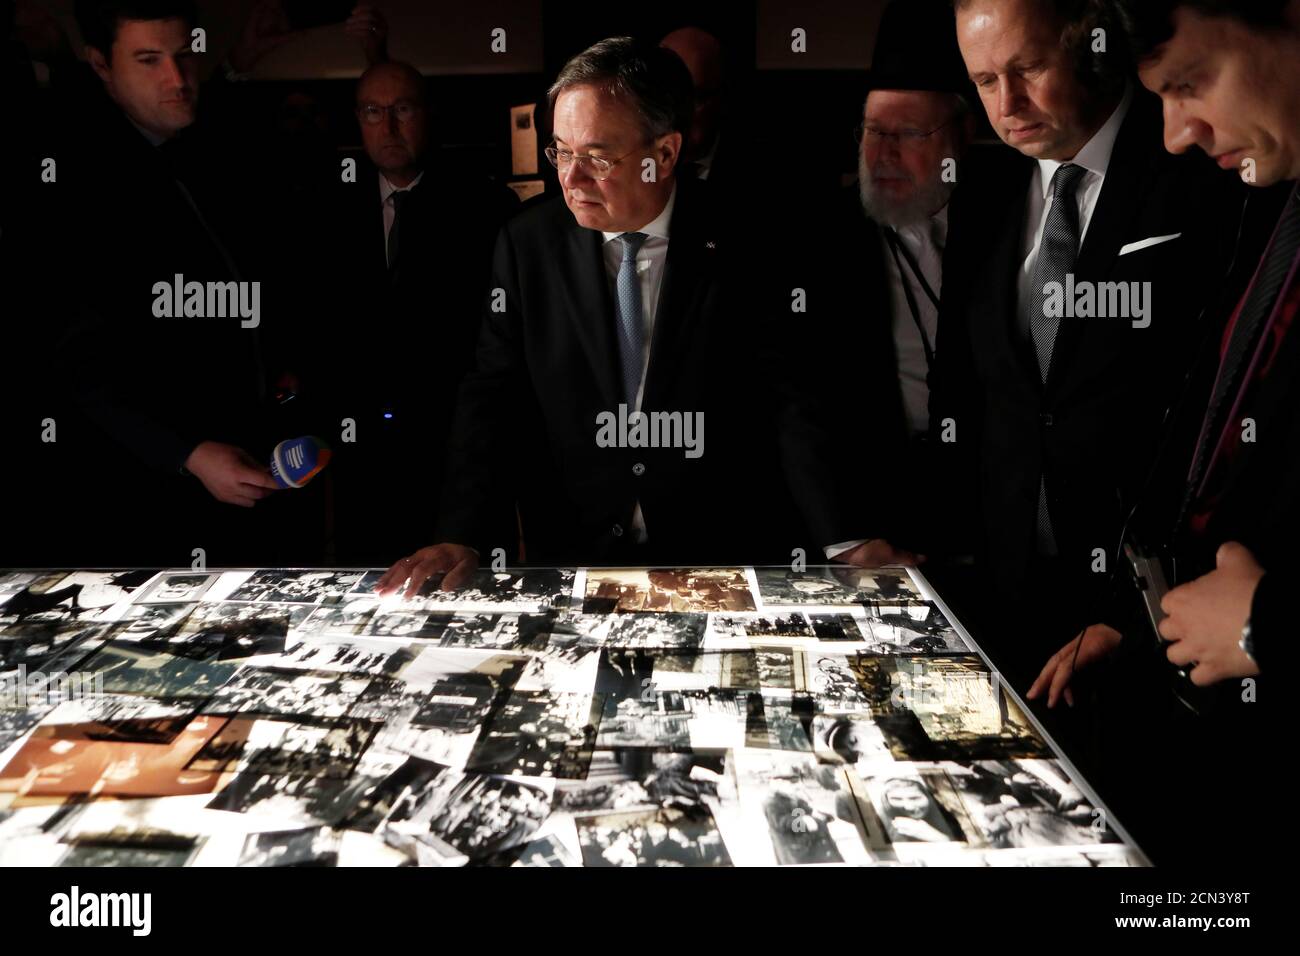 German politician Armin Laschet, Minister-President of Nordrhein-Westphalen, looks a pictures as he views an exhibition during his visit at Yad Vashem World Holocaust Remembrance Center in Jerusalem March 1, 2020. REUTERS/Ronen Zvulun Stock Photo